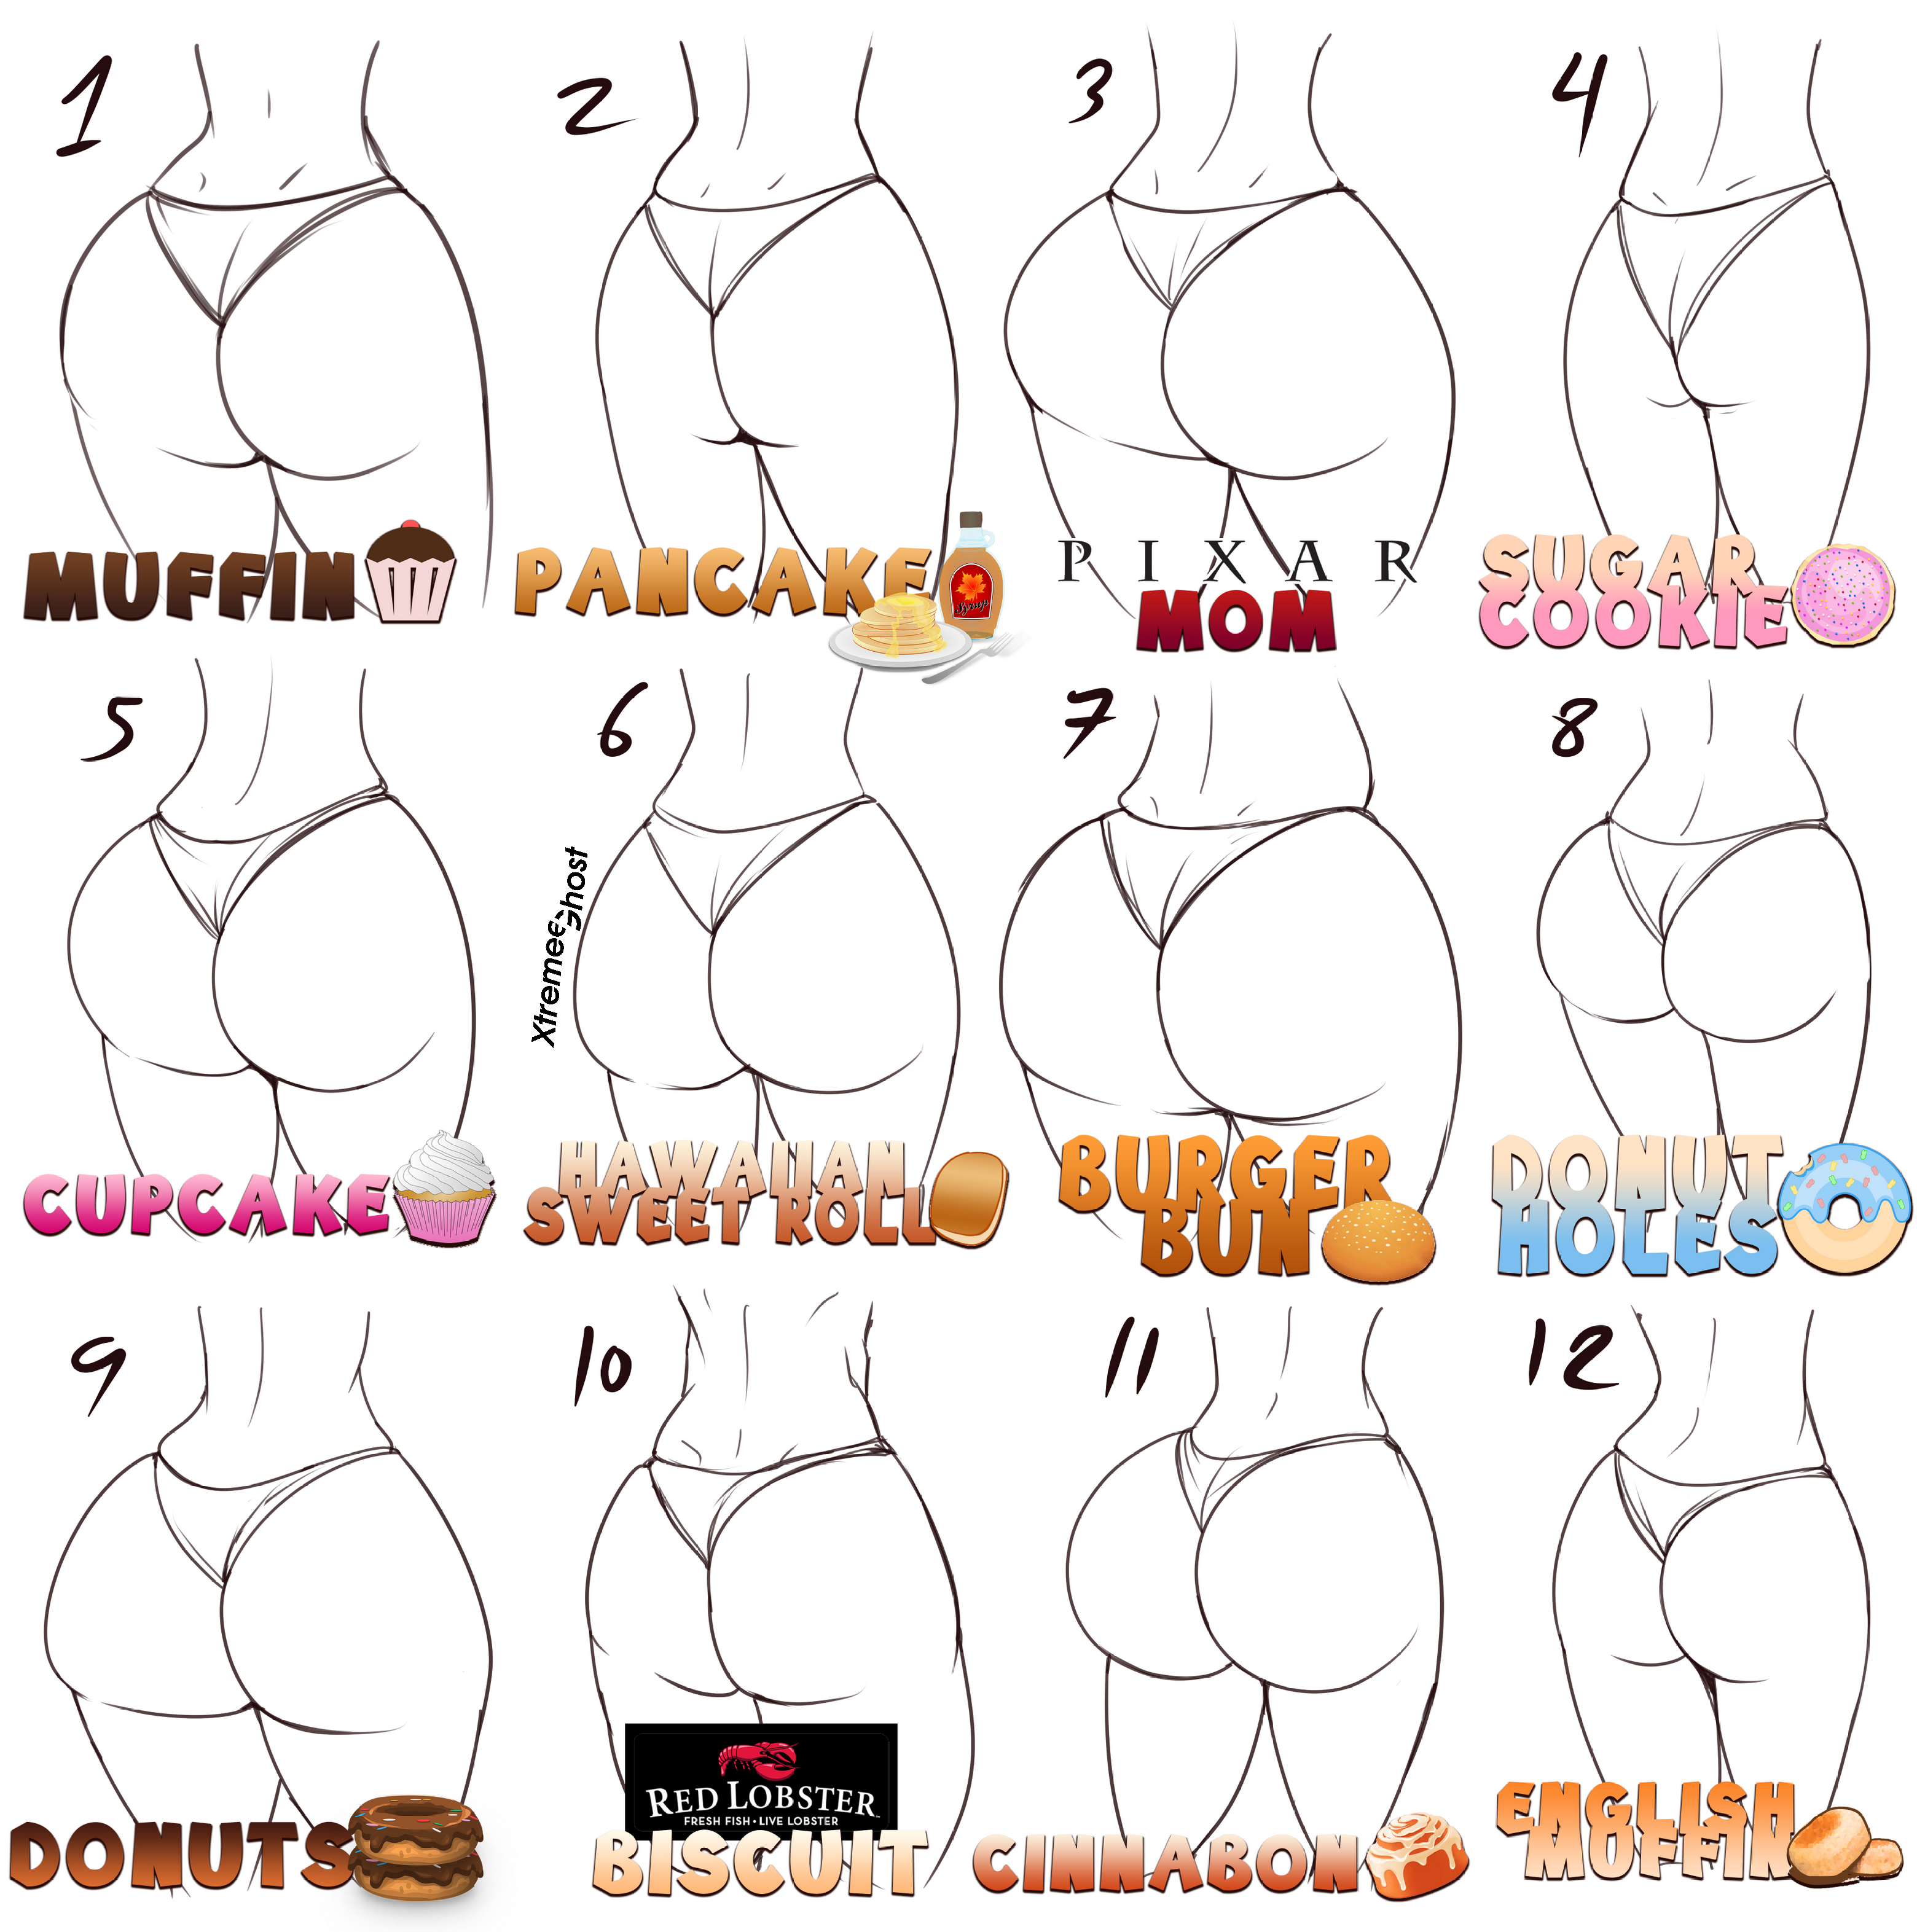 The many butts.